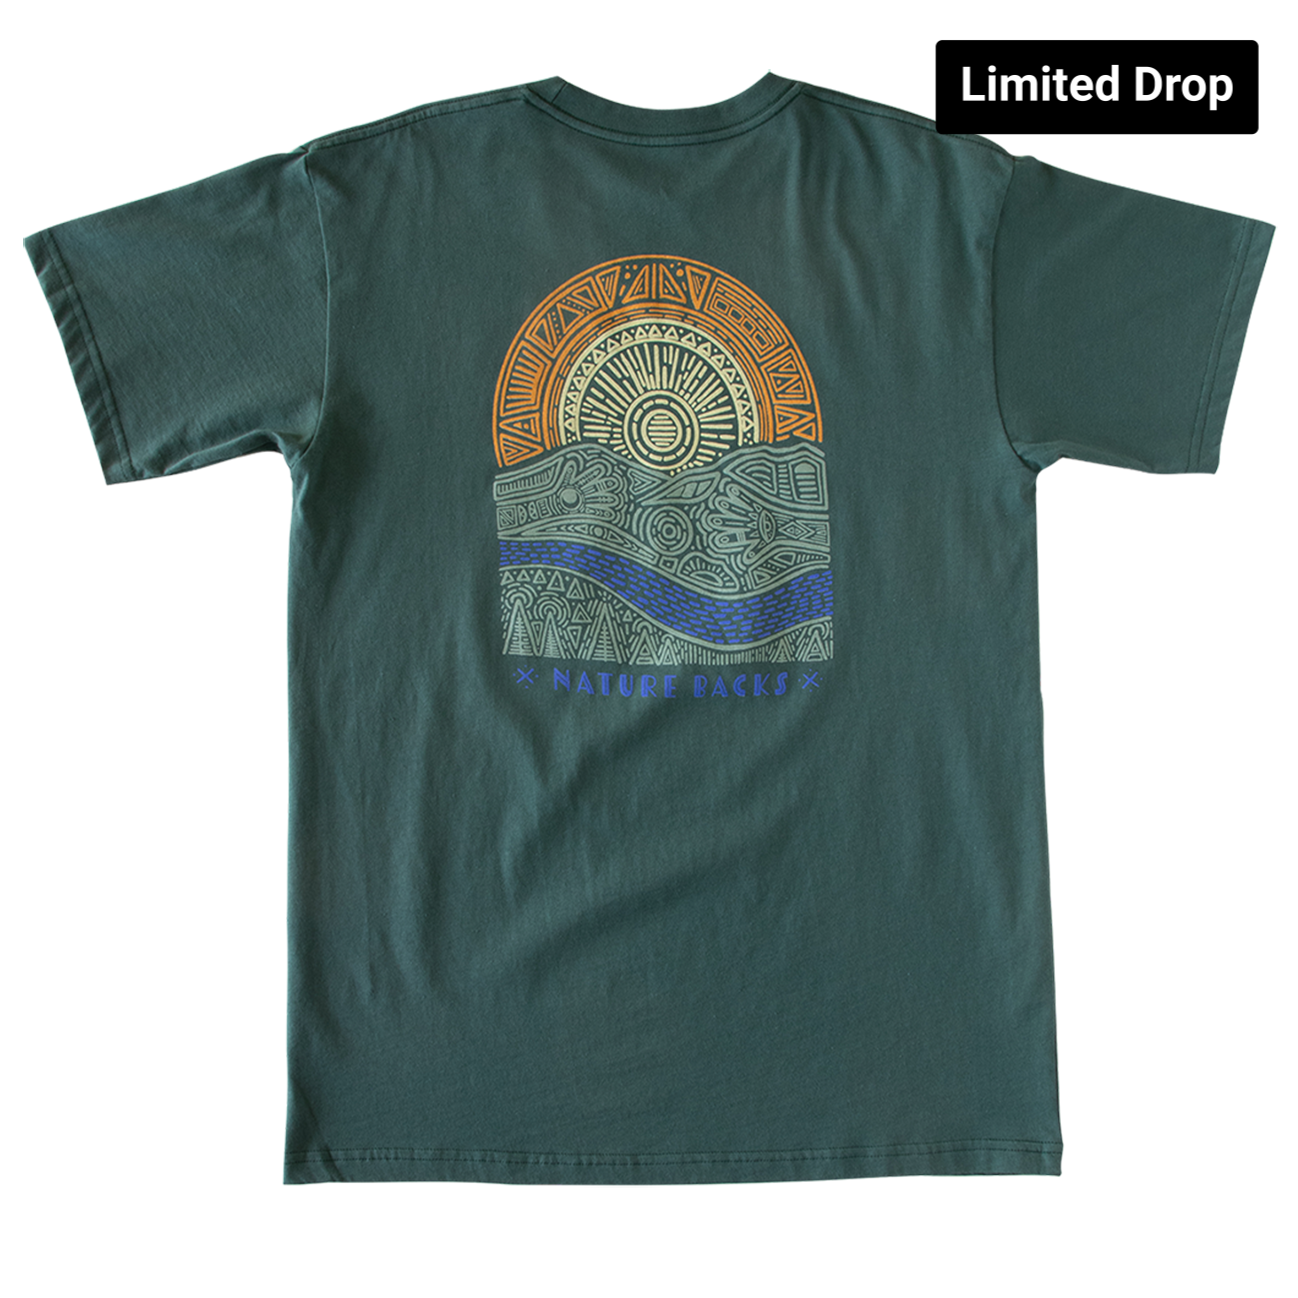 Nature Backs Limited Edition Short Sleeve 100% Organic Cotton T-Shirt | Limited Origin Spruce Short Sleeve made with Eco-Friendly Fibers Sustainably made in the USA 